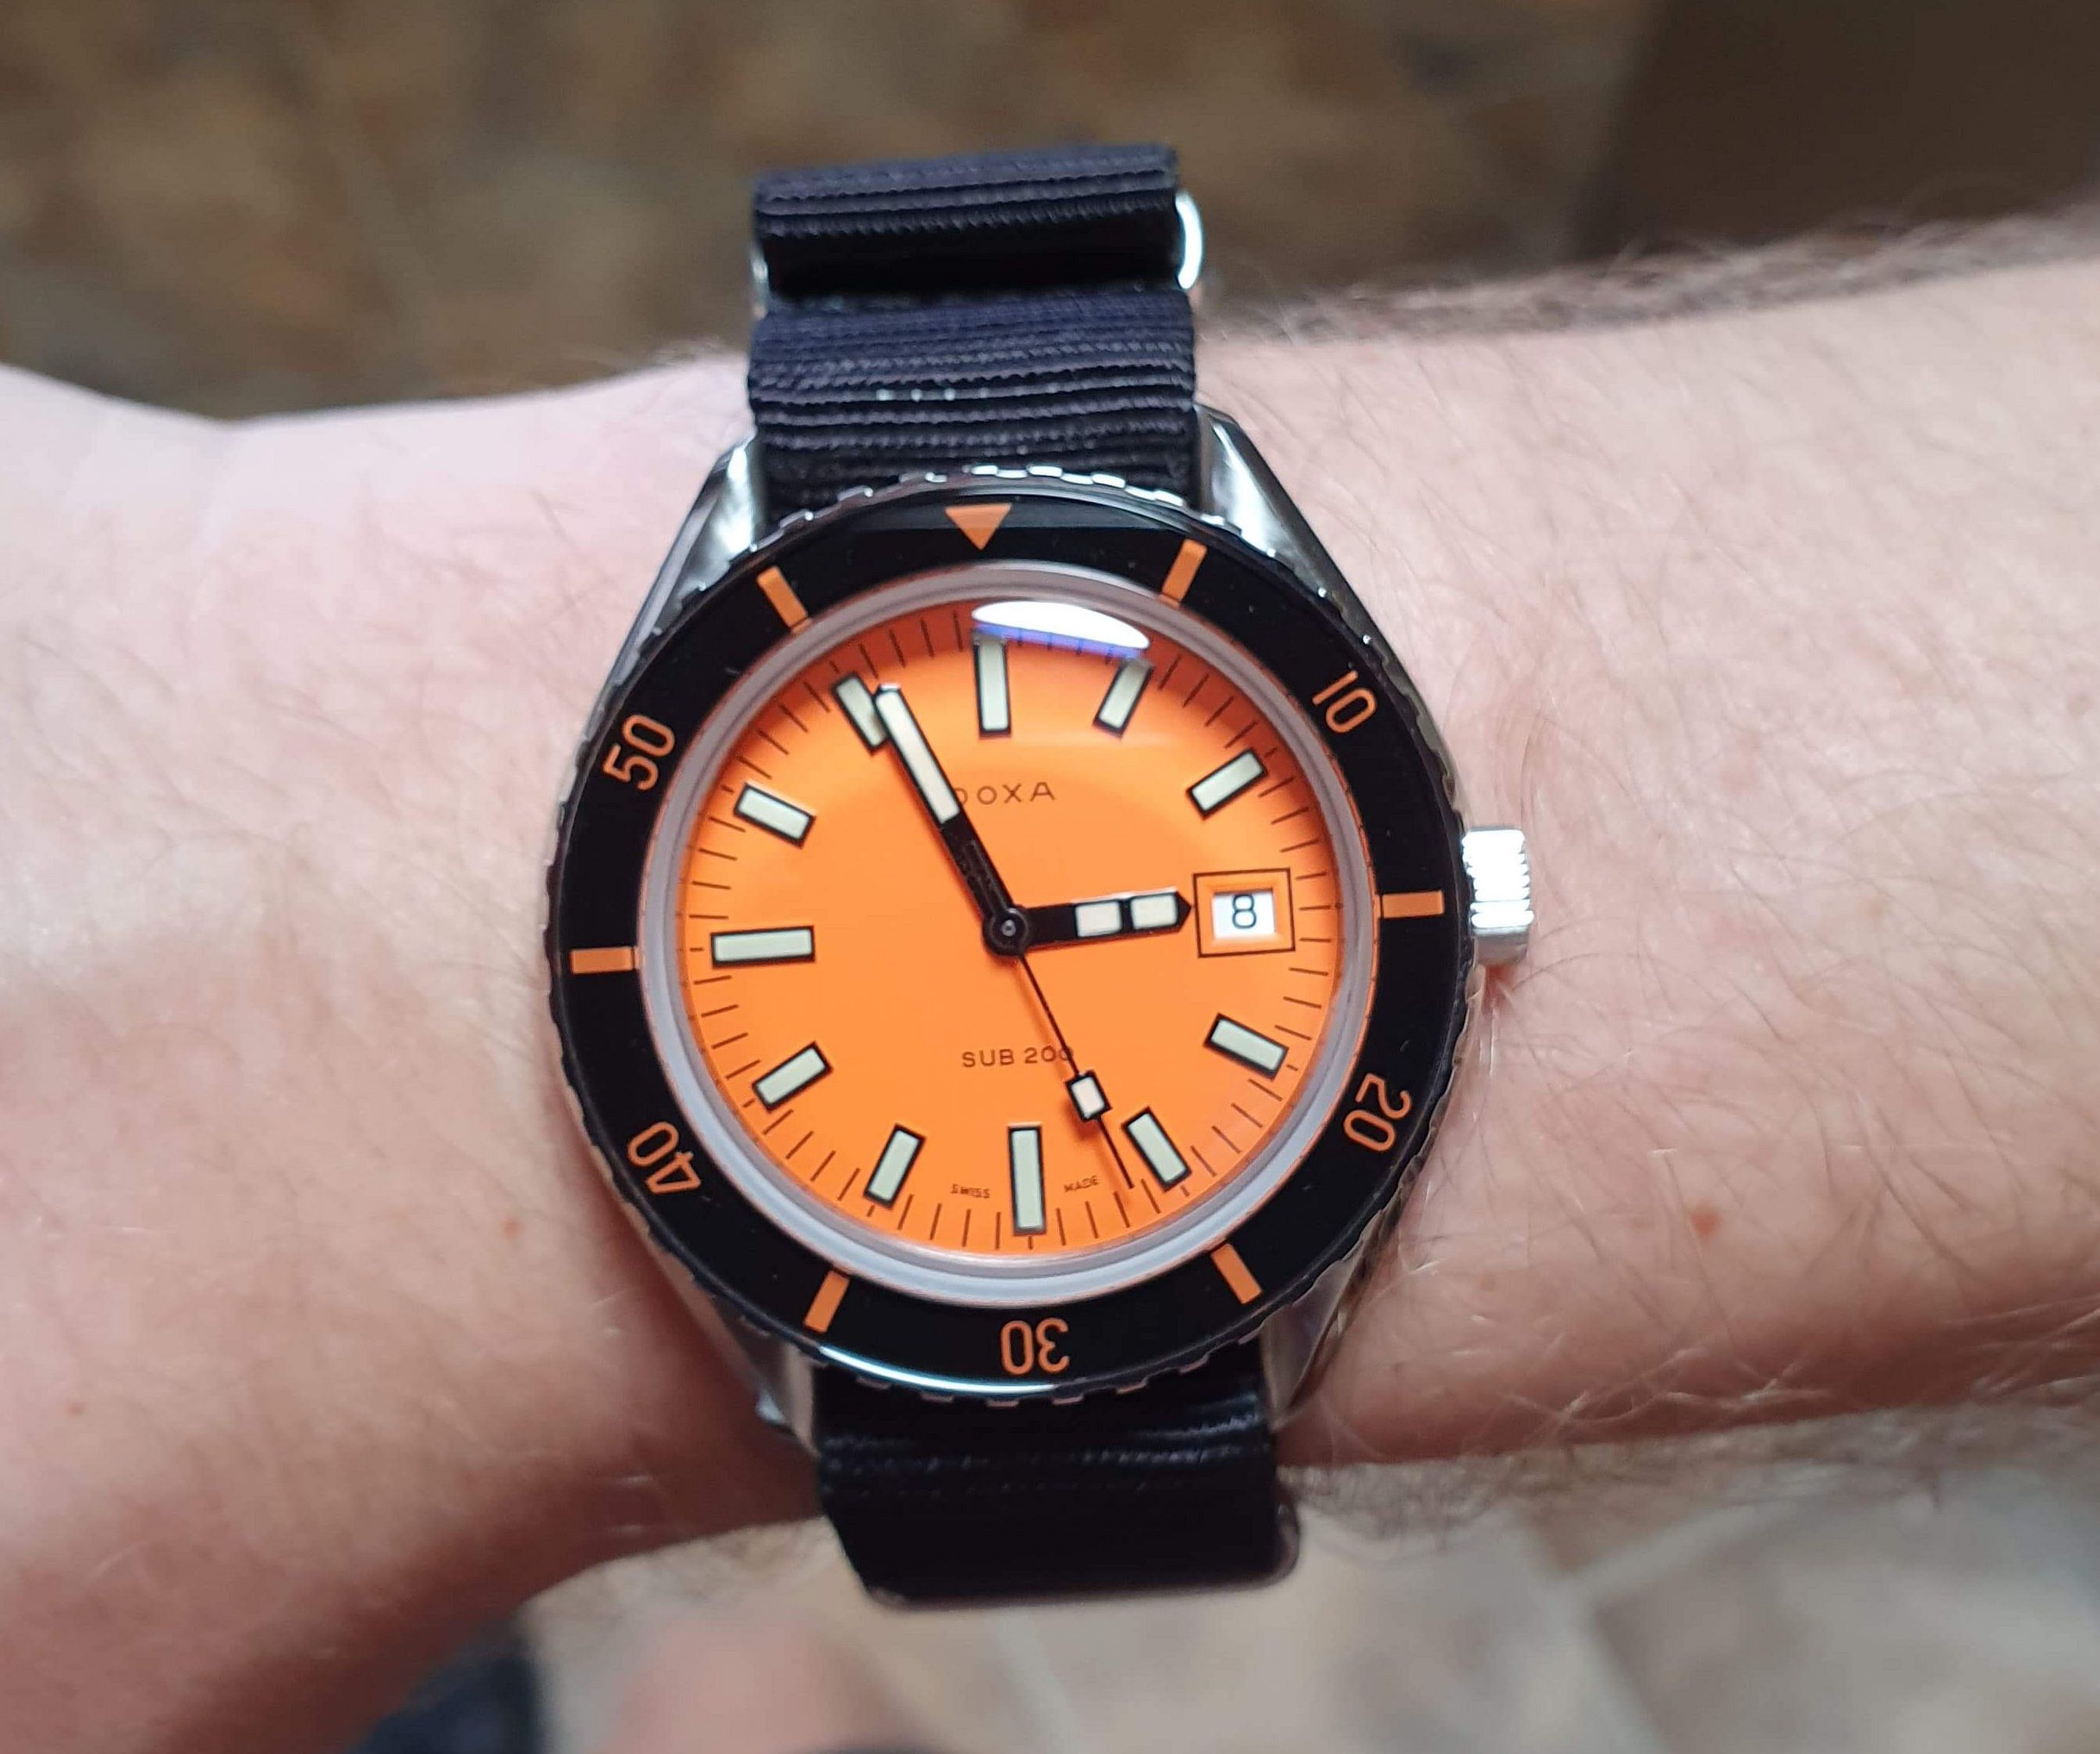 Weekend watch spotting labour day